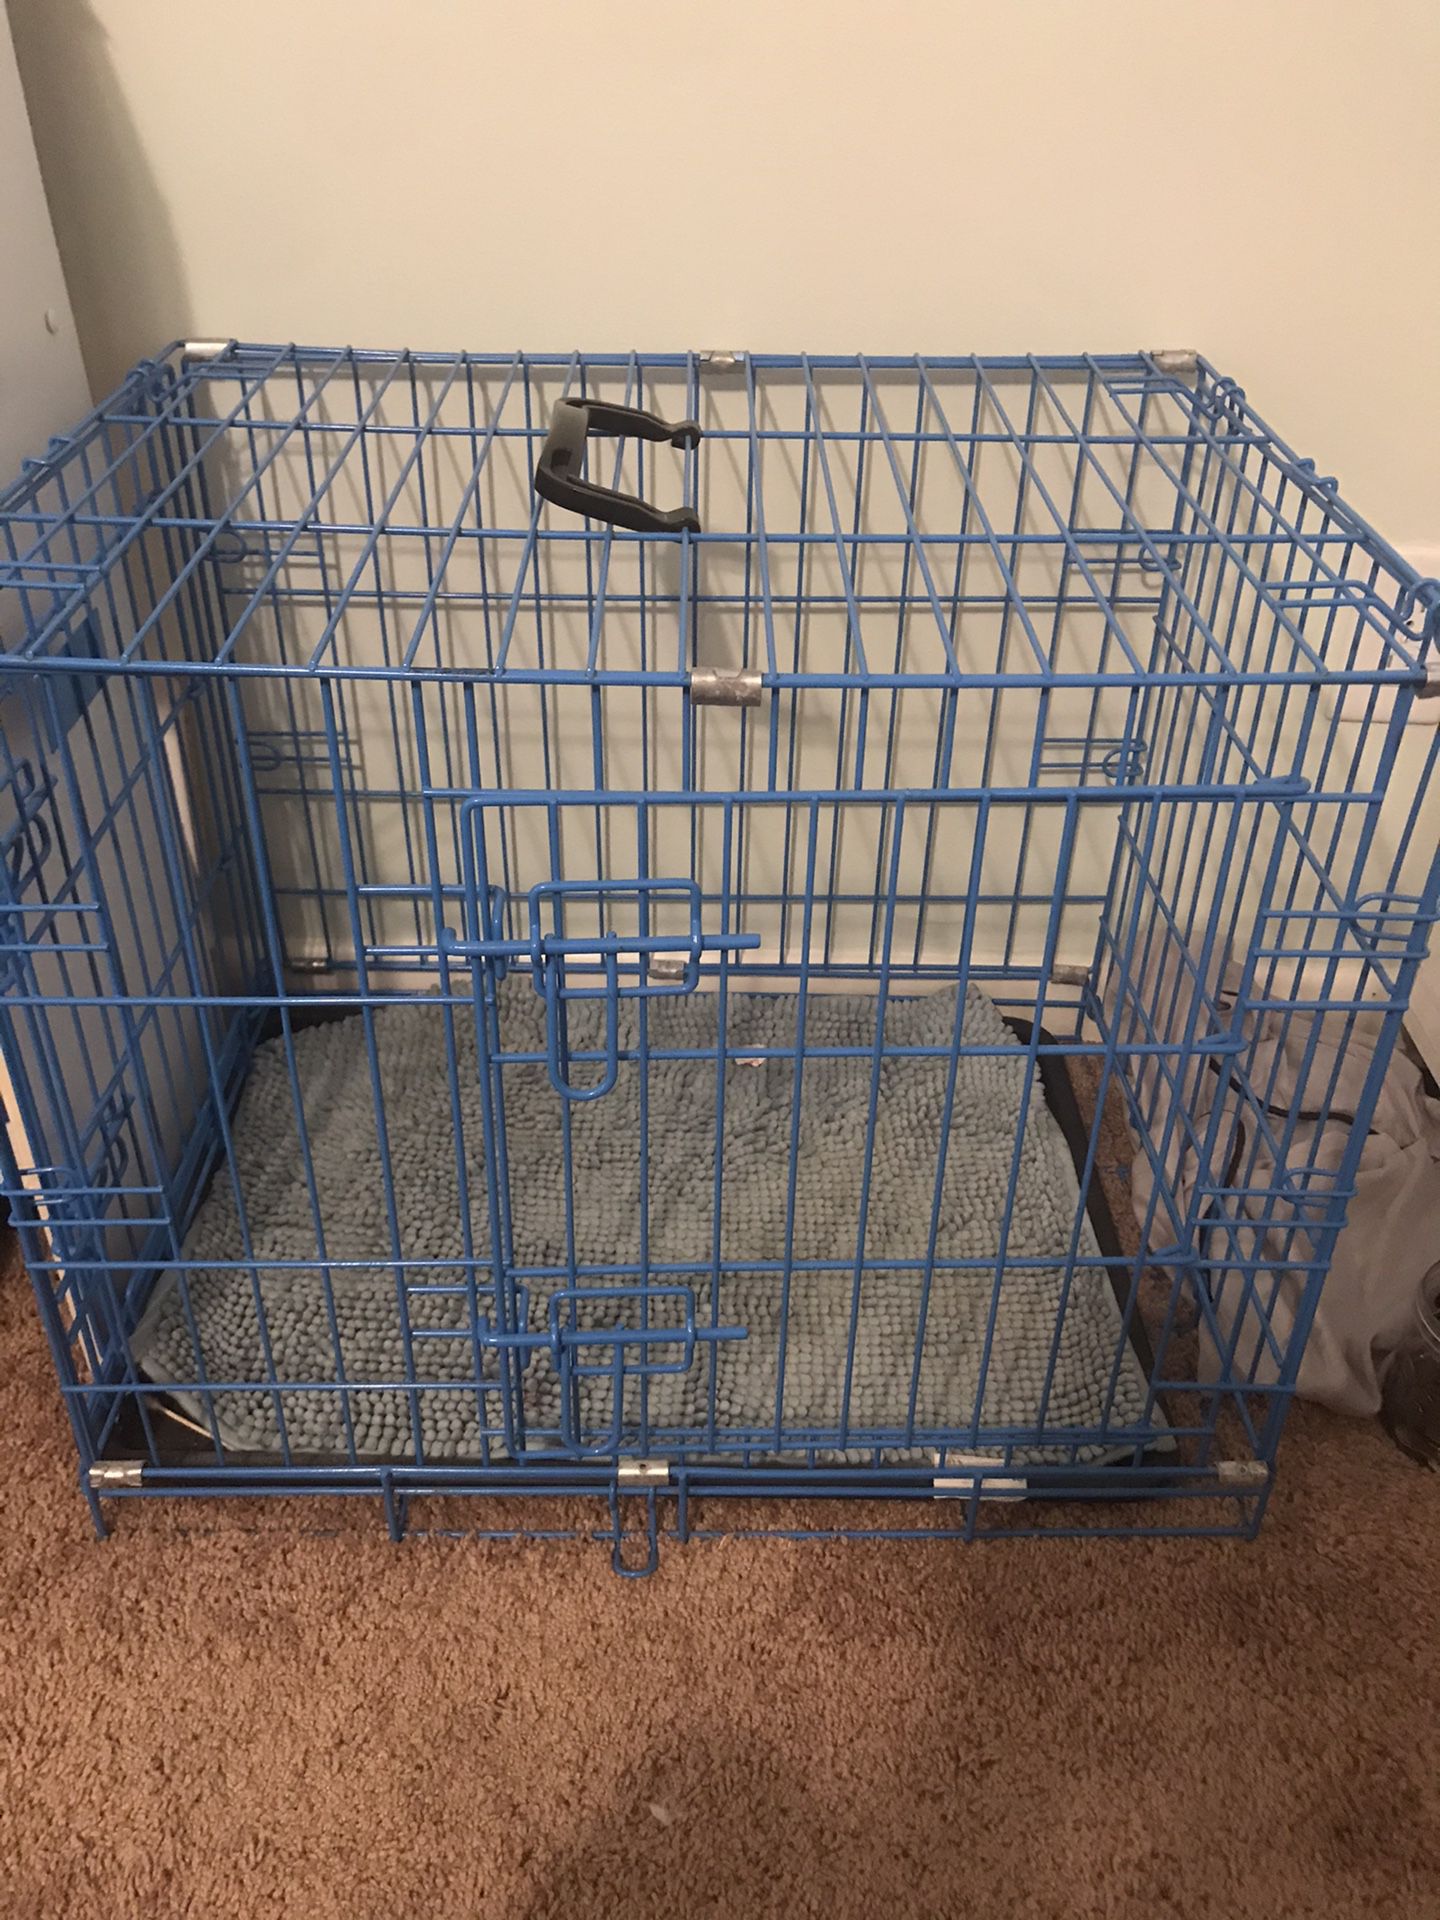 Sysco cage 24x20 small dogs, rabbit, and cats